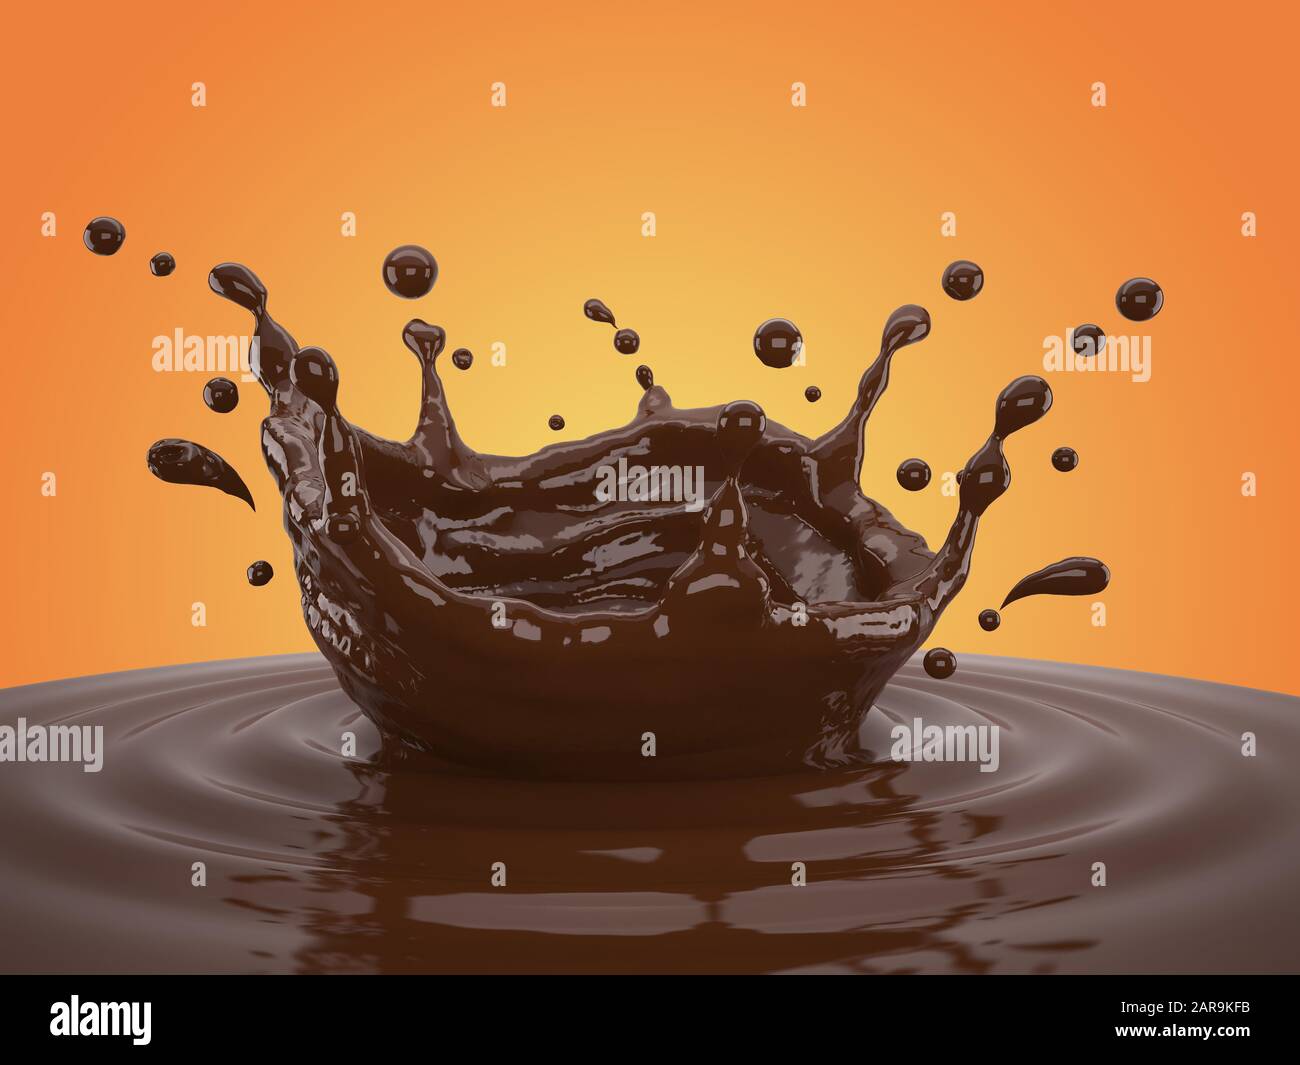 Download 3d Illustration Of Chocolate Splash On Gradient Yellow Background With Clipping Path Stock Photo Alamy Yellowimages Mockups